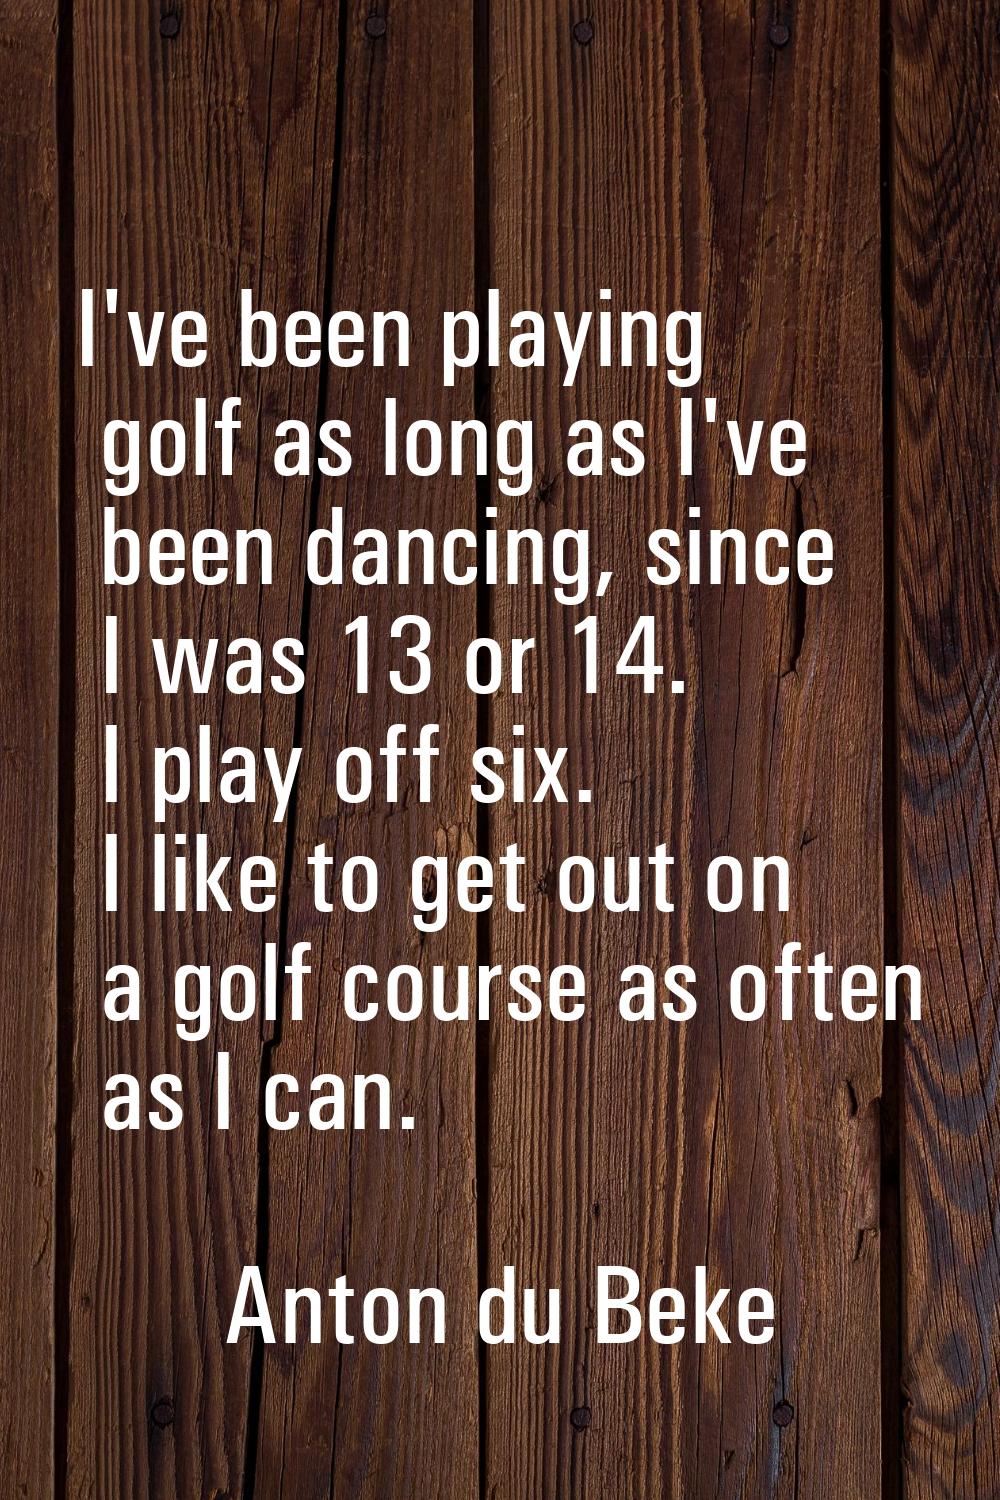 I've been playing golf as long as I've been dancing, since I was 13 or 14. I play off six. I like t